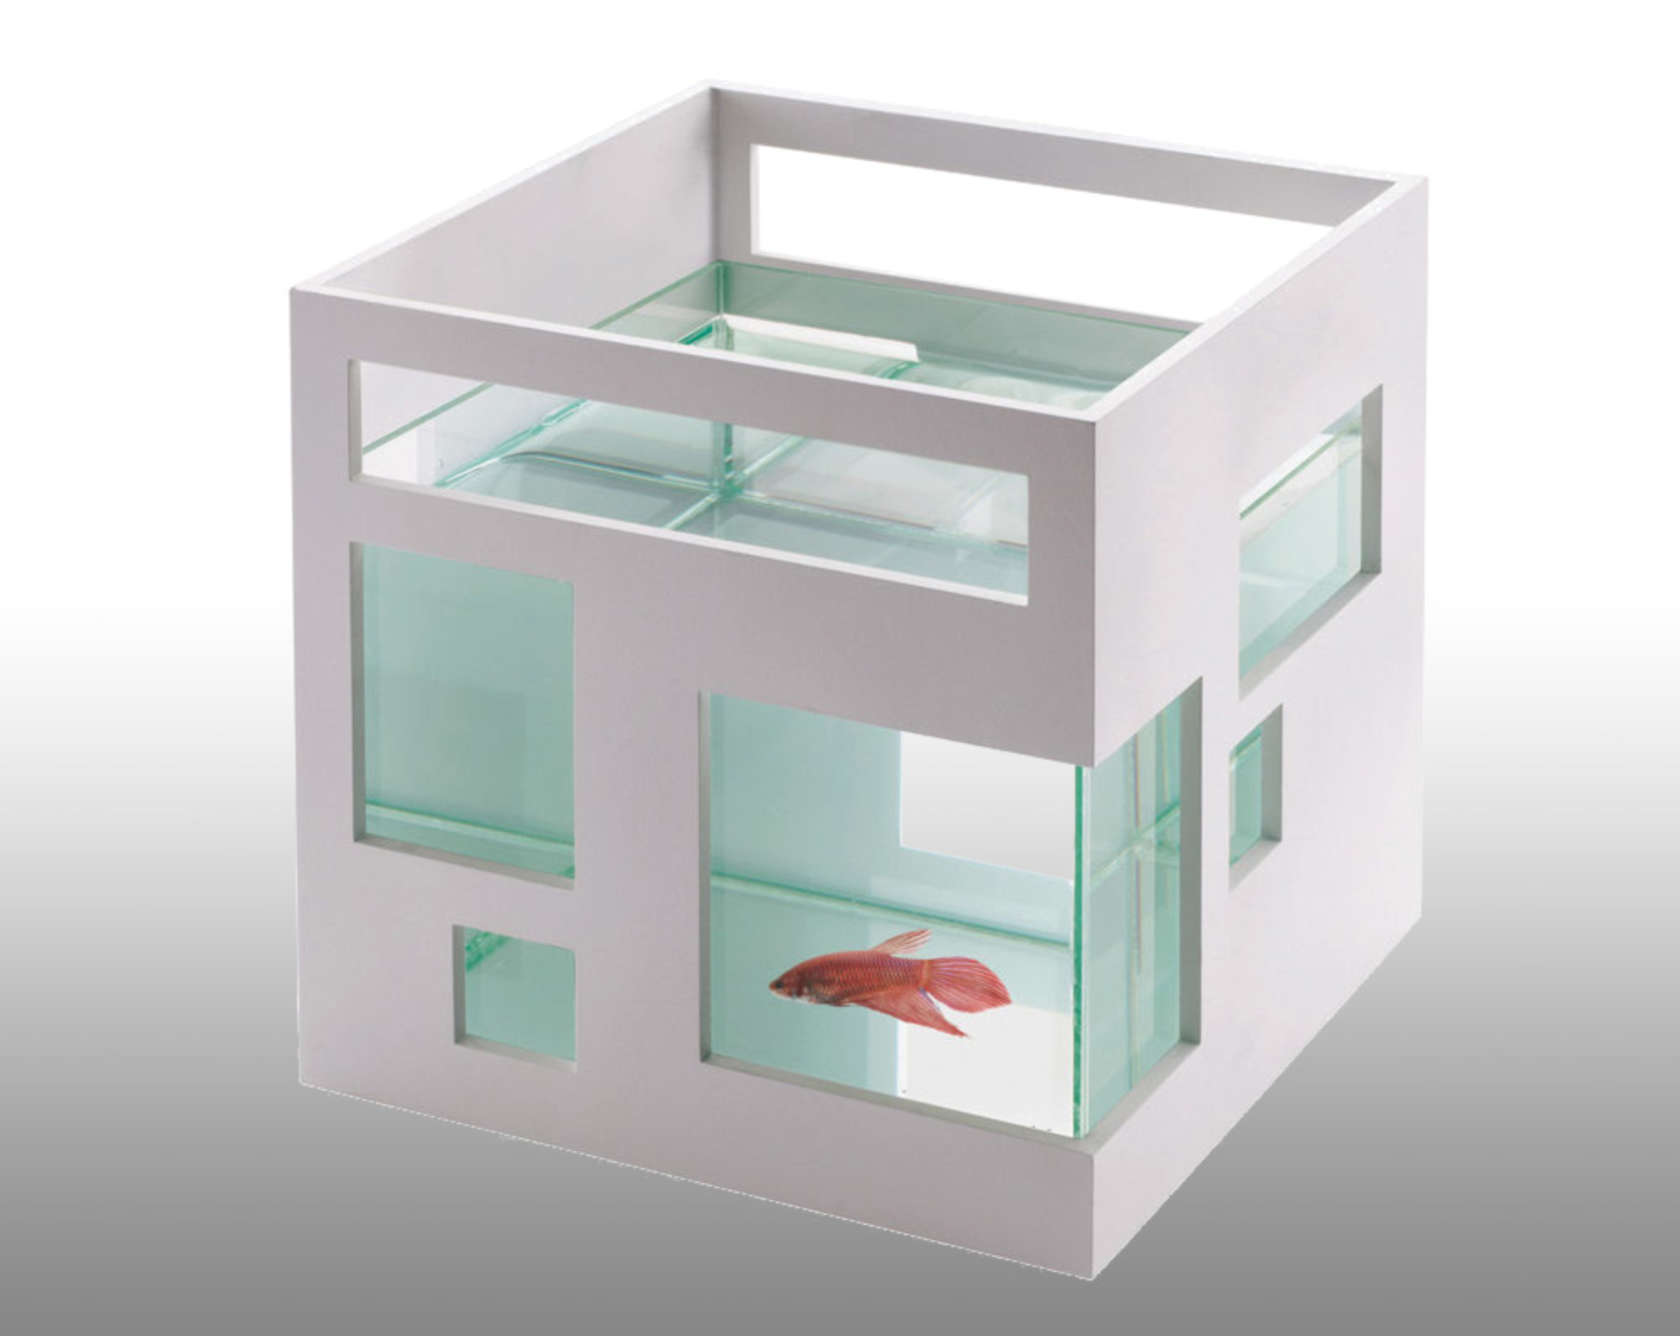 Umbra Fish Hotel Fish Bowl  This fish bowl was modeled after a "contemporary condominium," with sleek white walls and asymmetrical windows. Image SkyMall